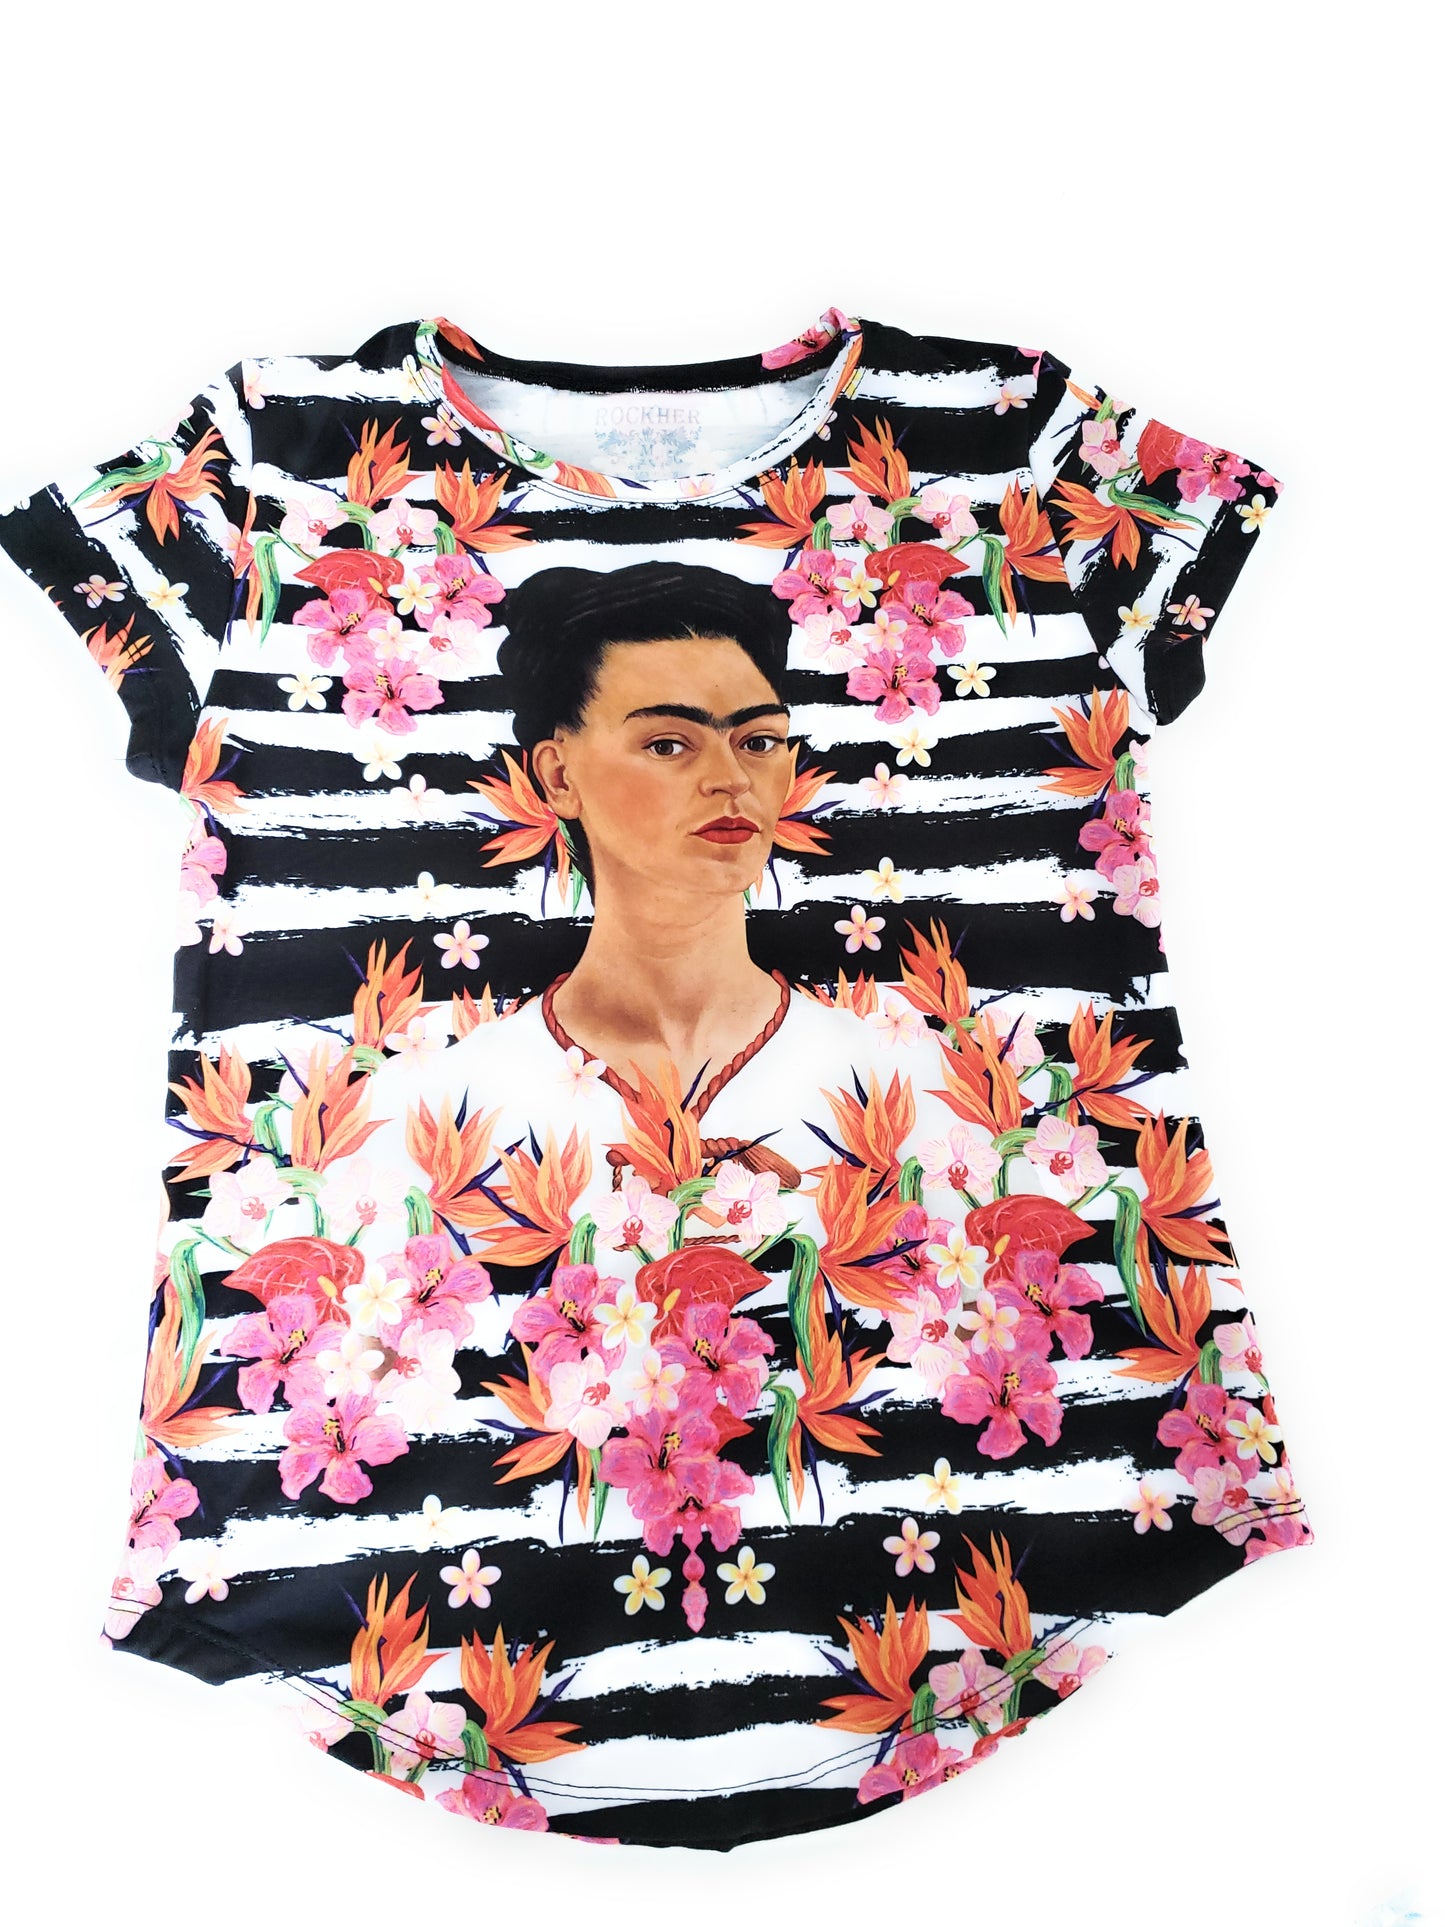 Frida Kahlo Full Print Graphic Tee Mexican T-Shirt Black Striped - The Little Pueblo